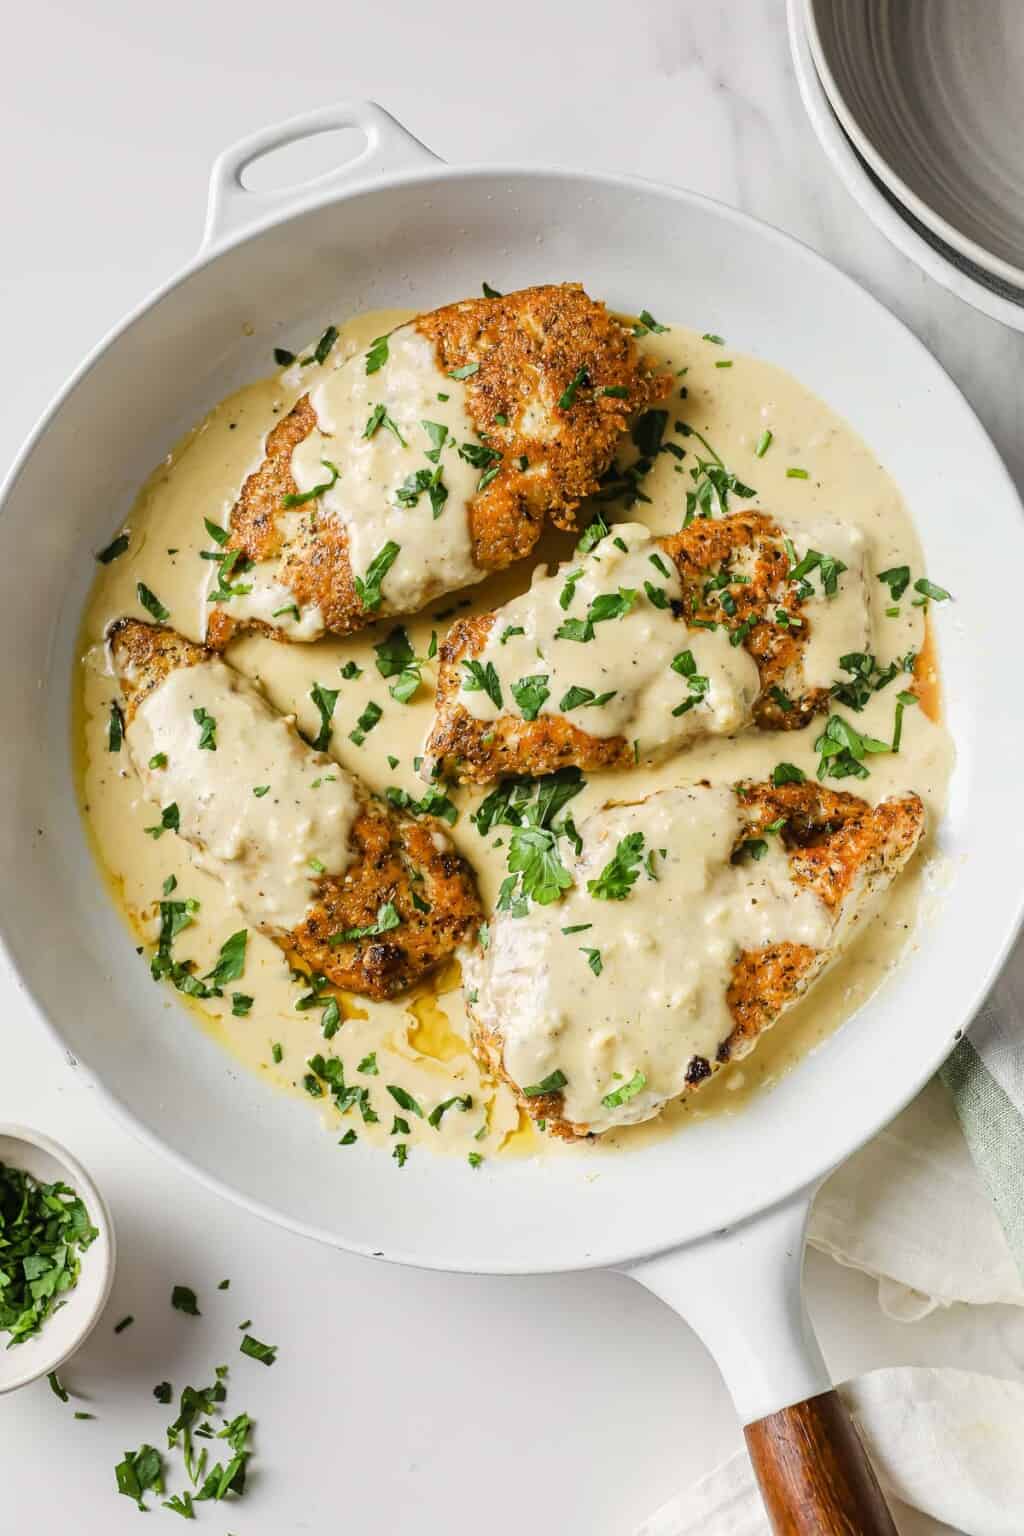 Parmesan Crusted Chicken with Lemon Cream Sauce